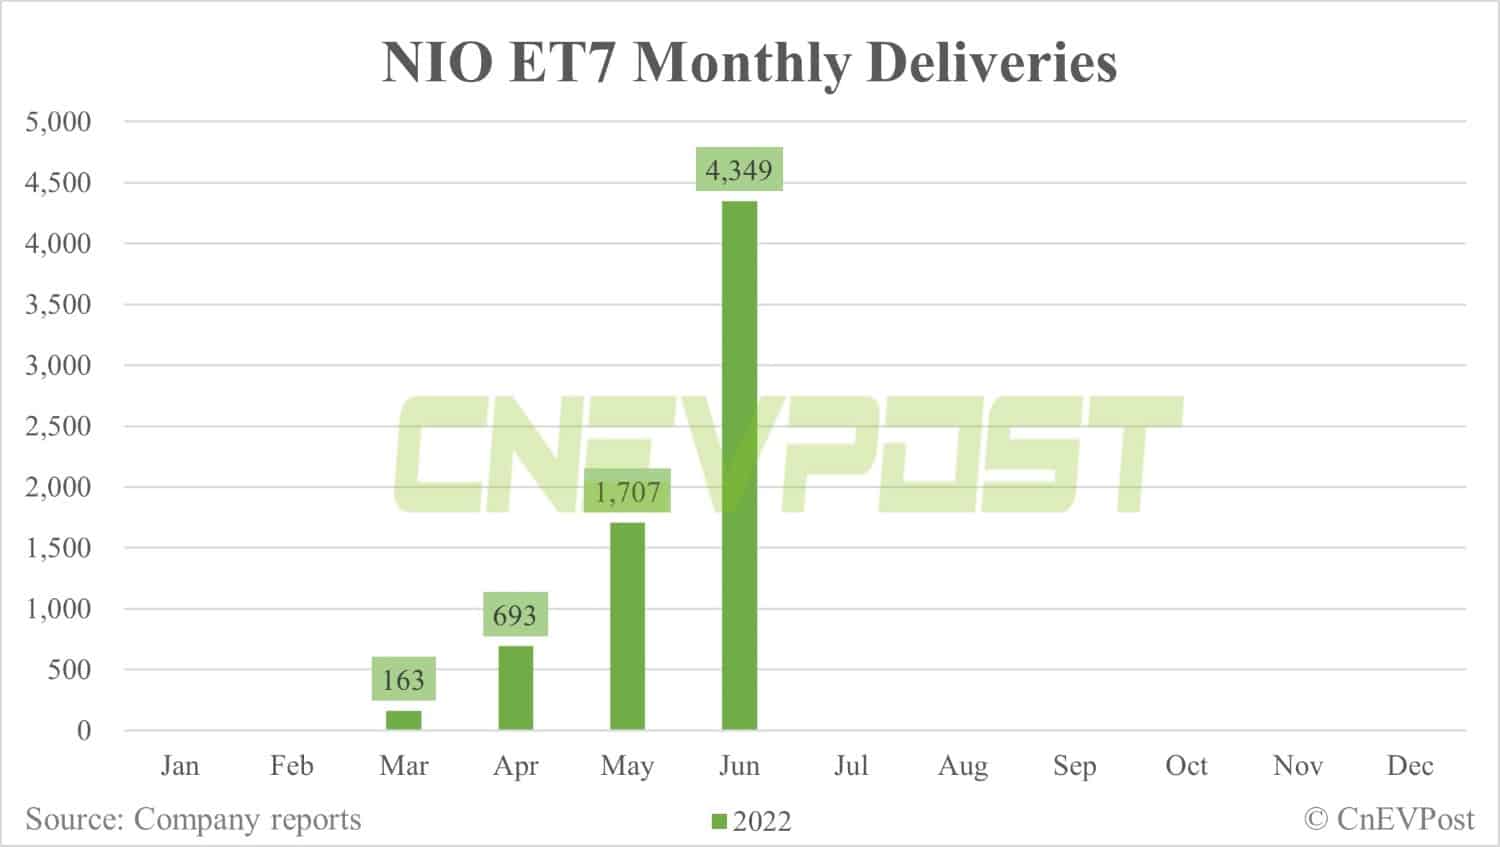 NIO delivers record 12,961 vehicles in June as supply chain fully recovers-CnEVPost